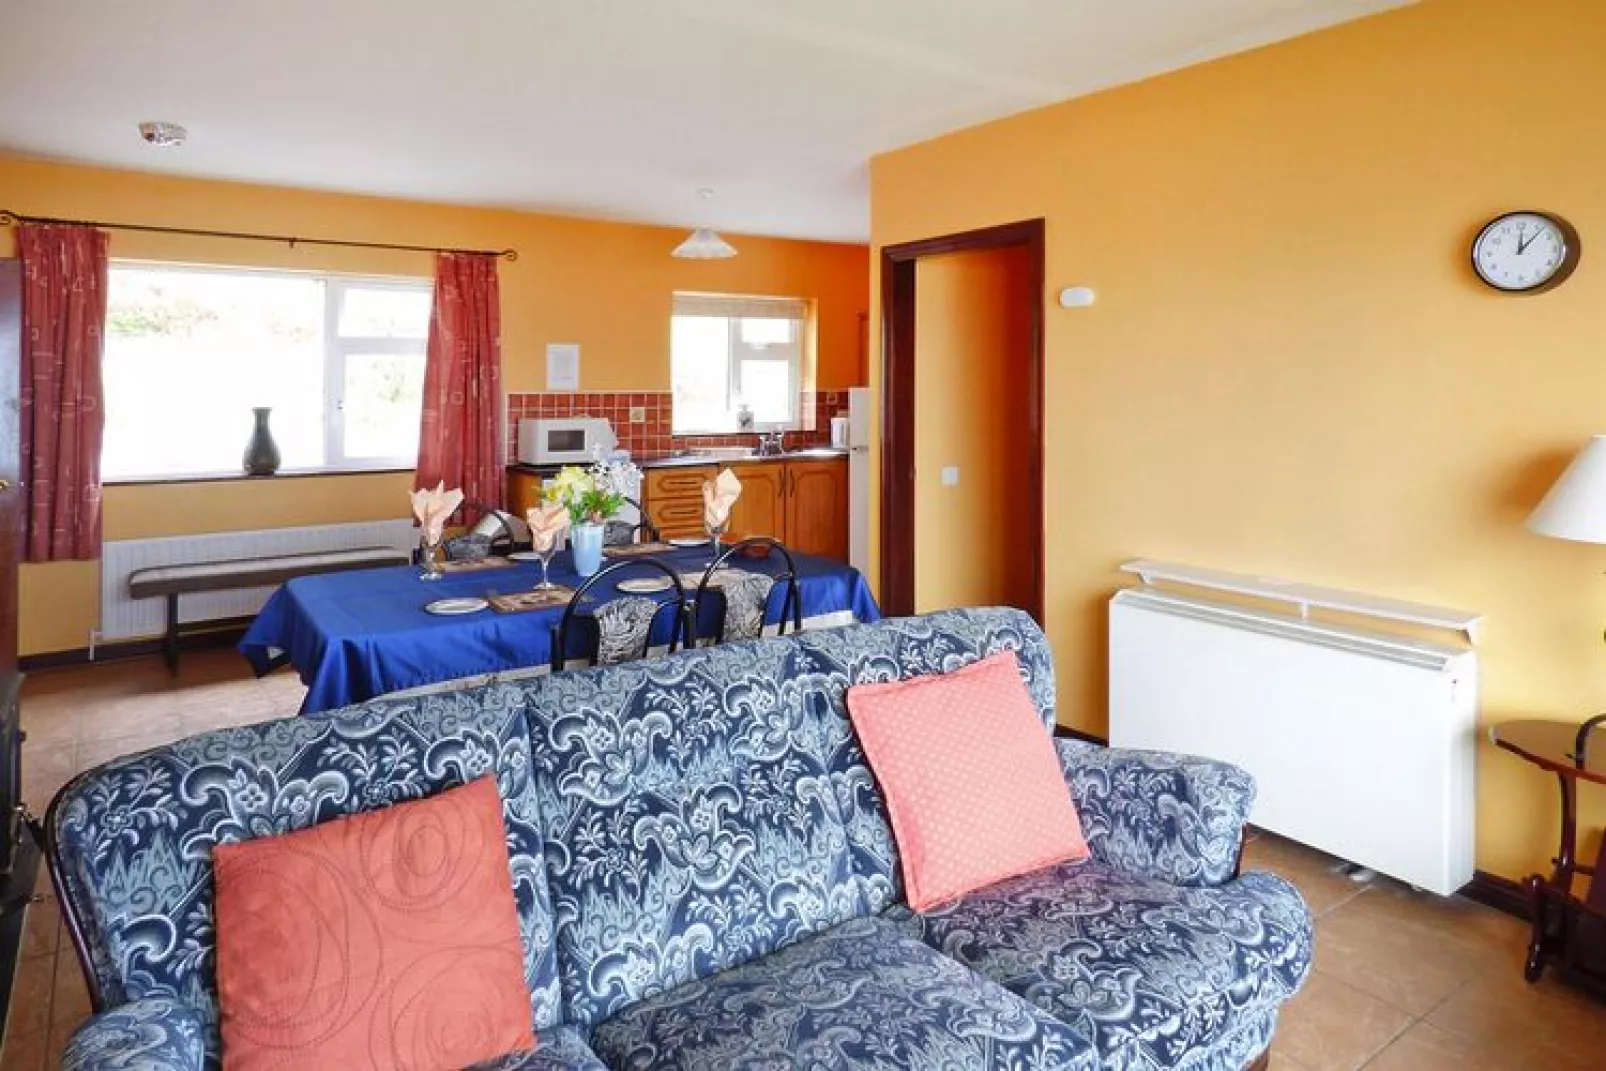 Rossbeigh Beach Holiday Cottages in Glenbeigh Co Kerry-Woonkamer